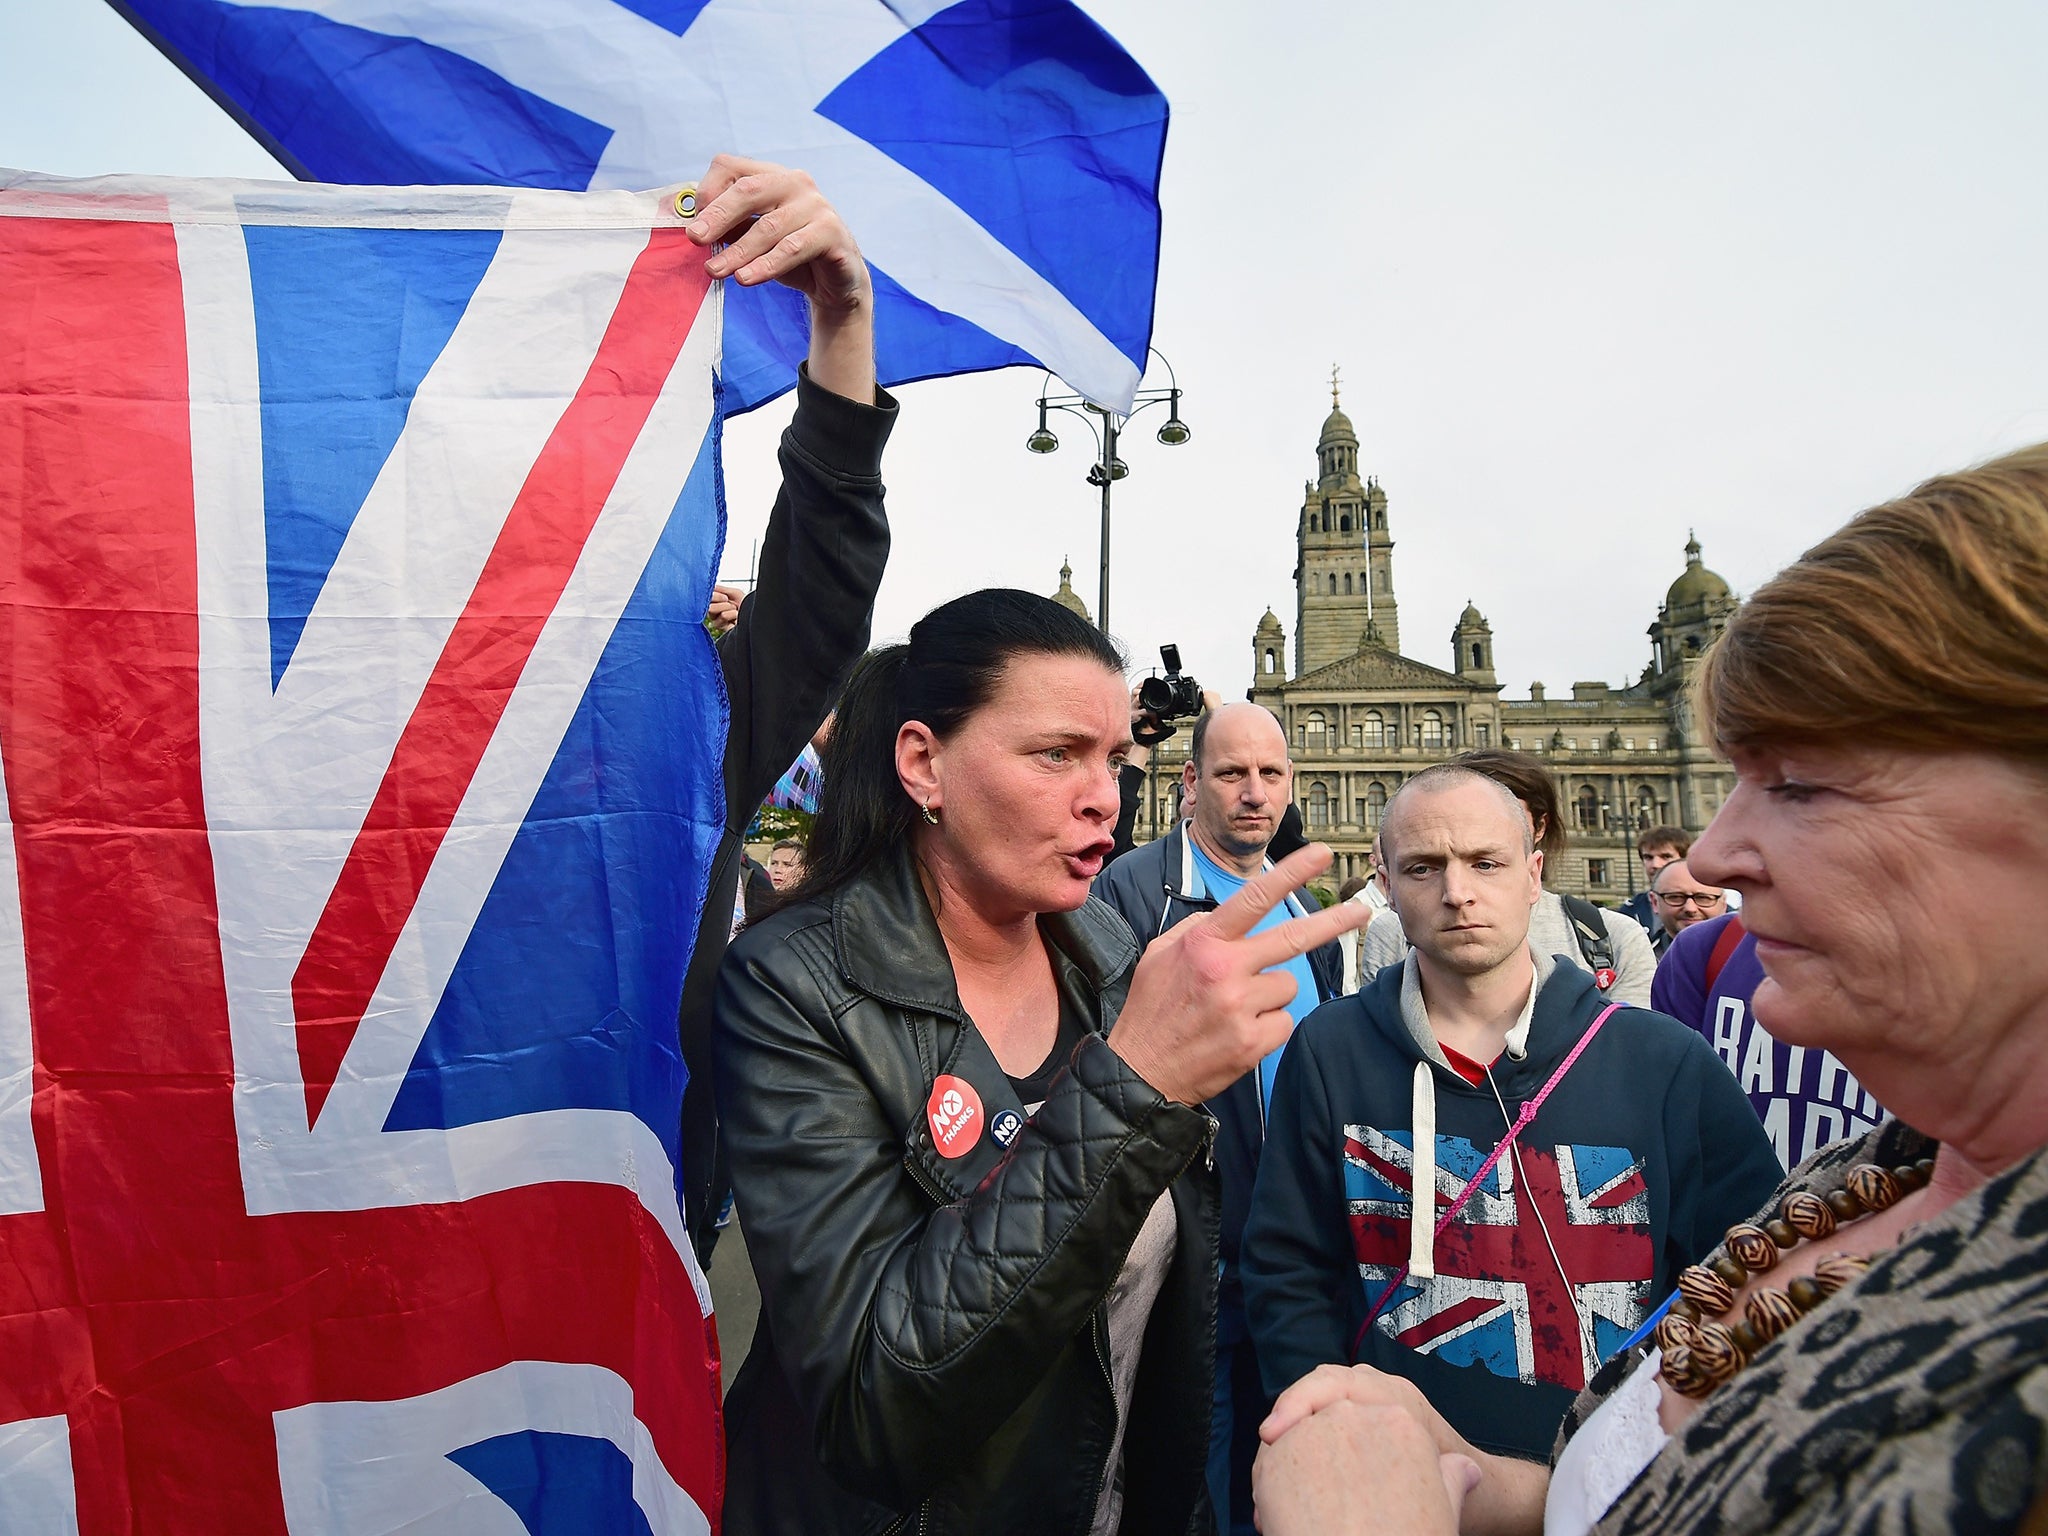 A yes supporter talks with a man and a woman with a Union flag in George Square, just a few hours before polling stations will close in the Scottish independence referendum